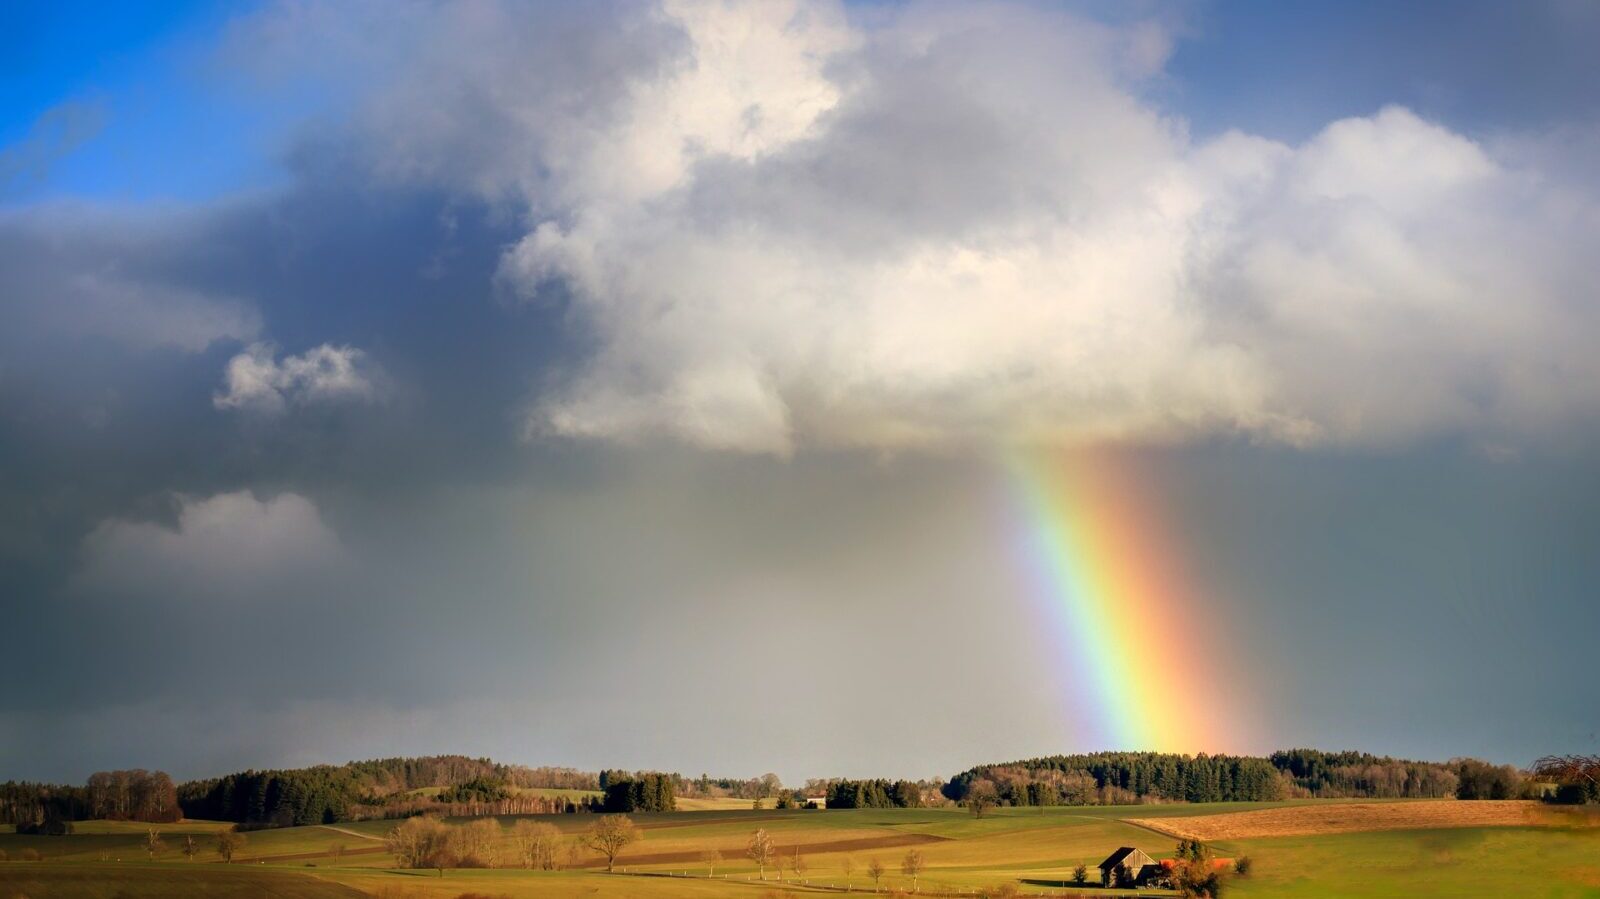 Over the rainbow: The role of hydrogen in a clean energy system, explained - Climate Home News